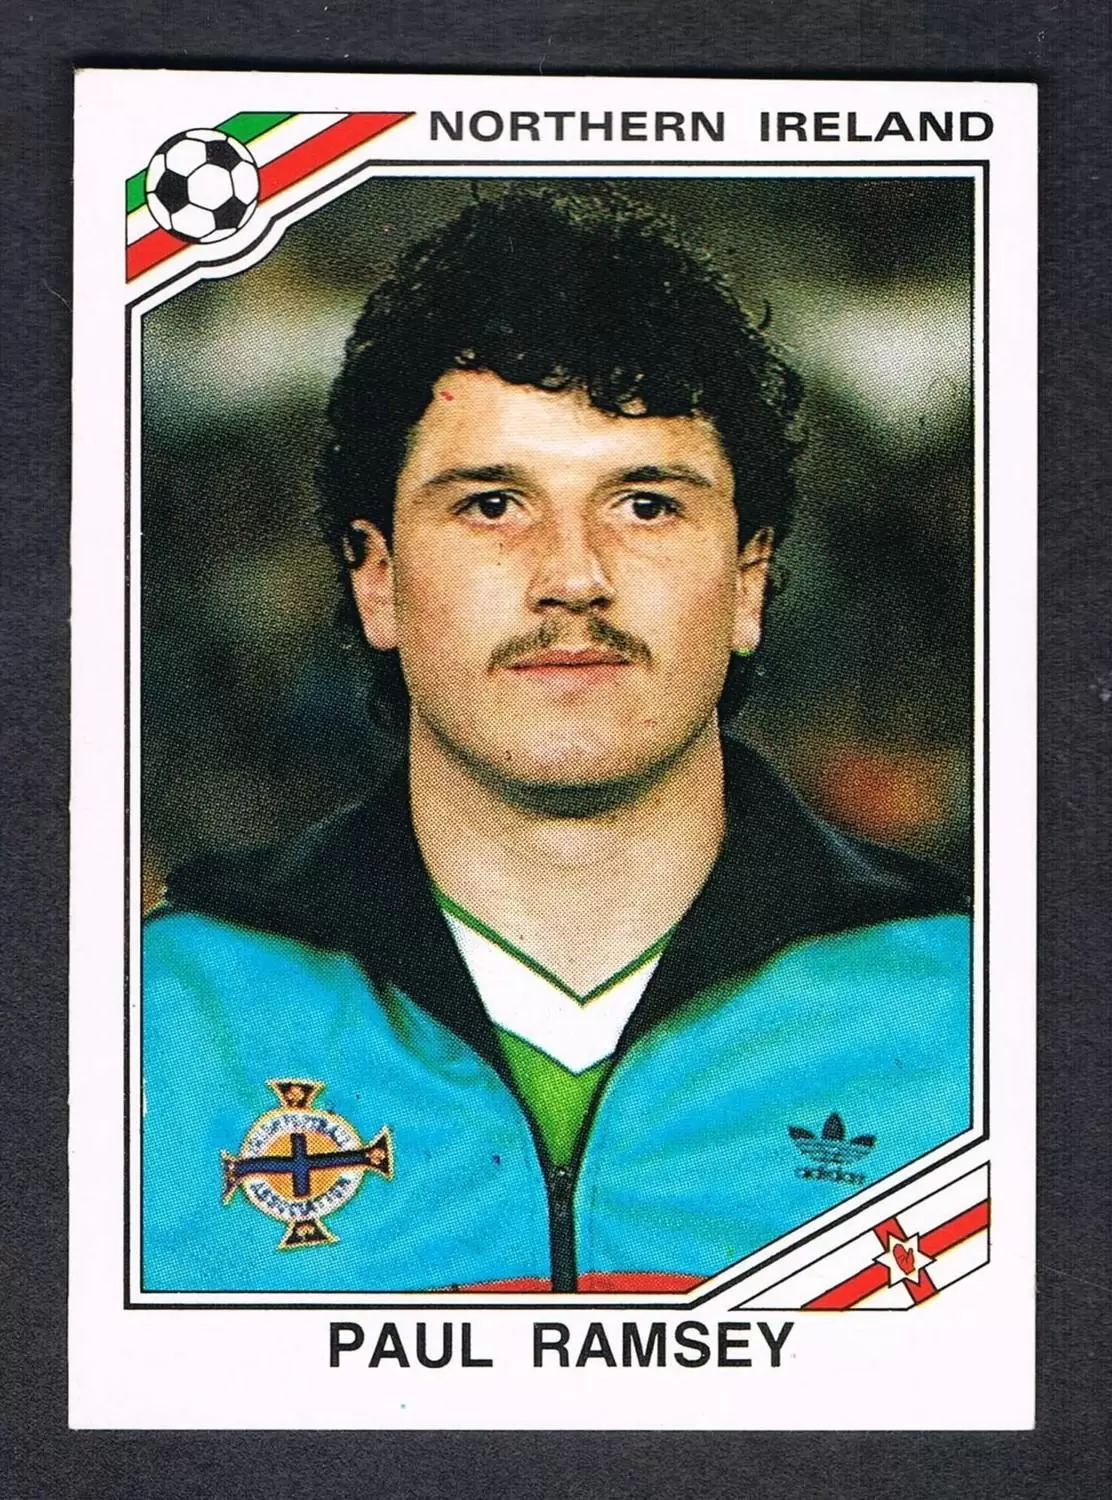 Mexico 86 World Cup - Paul Ramsey - Irlande du Nord